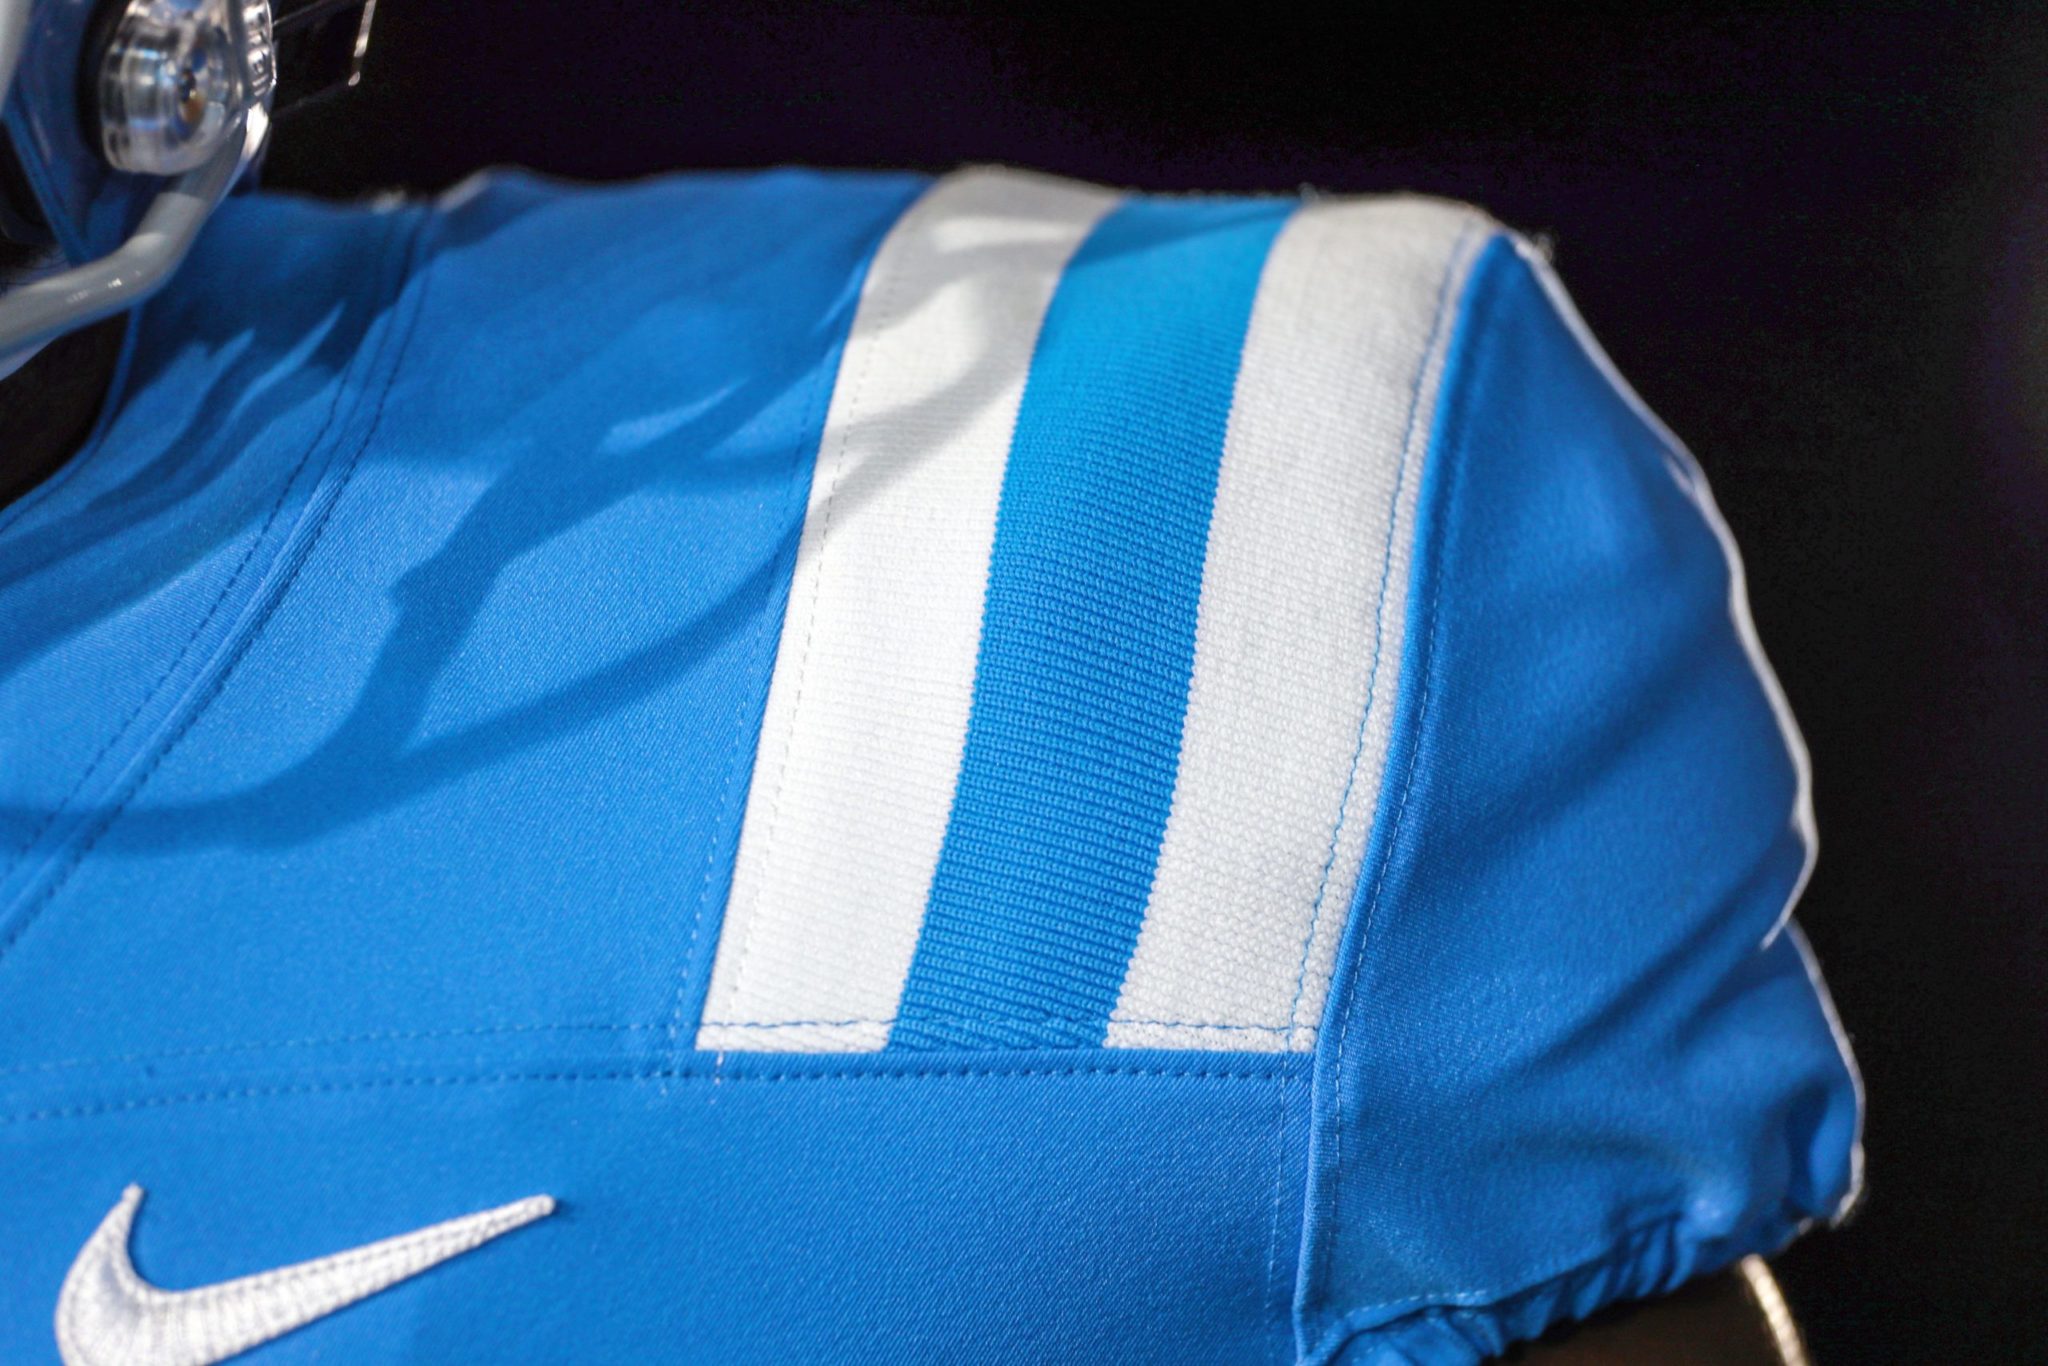 My Powder Blue jersey which was originally scheduled for May 31st